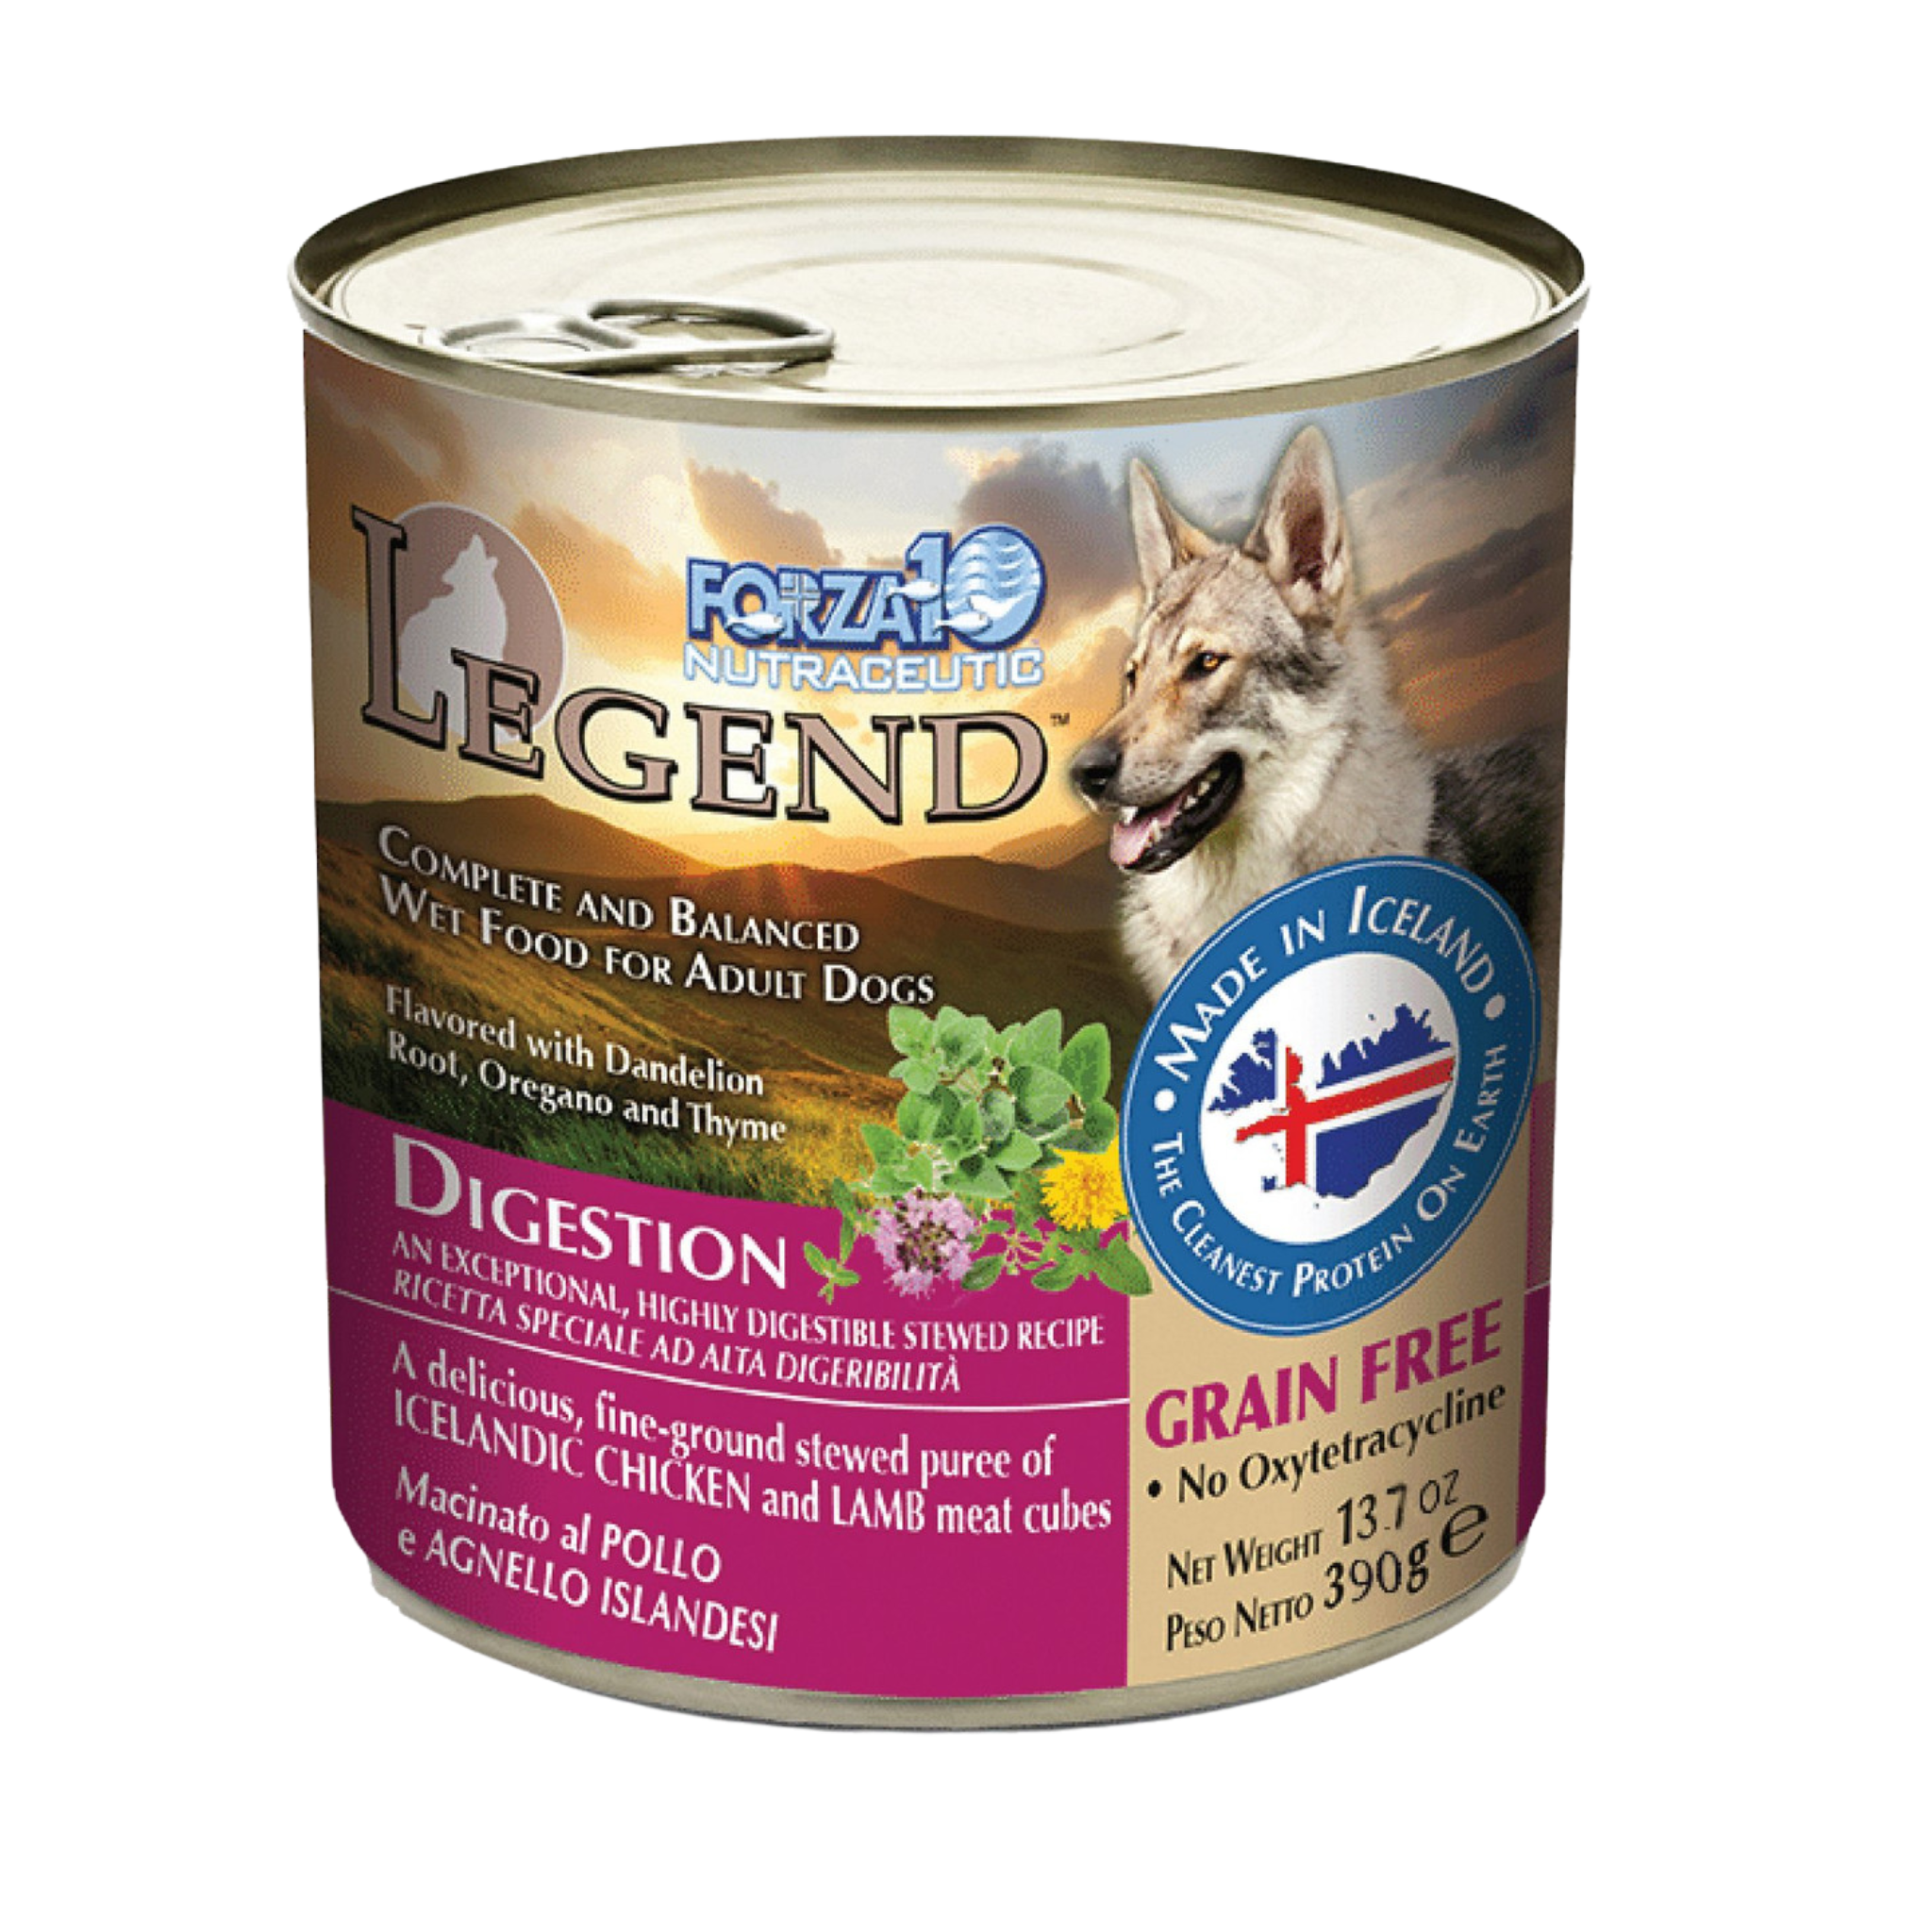 Forza10 Nutraceutic Legend Digestion Icelandic Chicken & Lamb Recipe Grain-Free Canned Dog Food 13.7-oz can